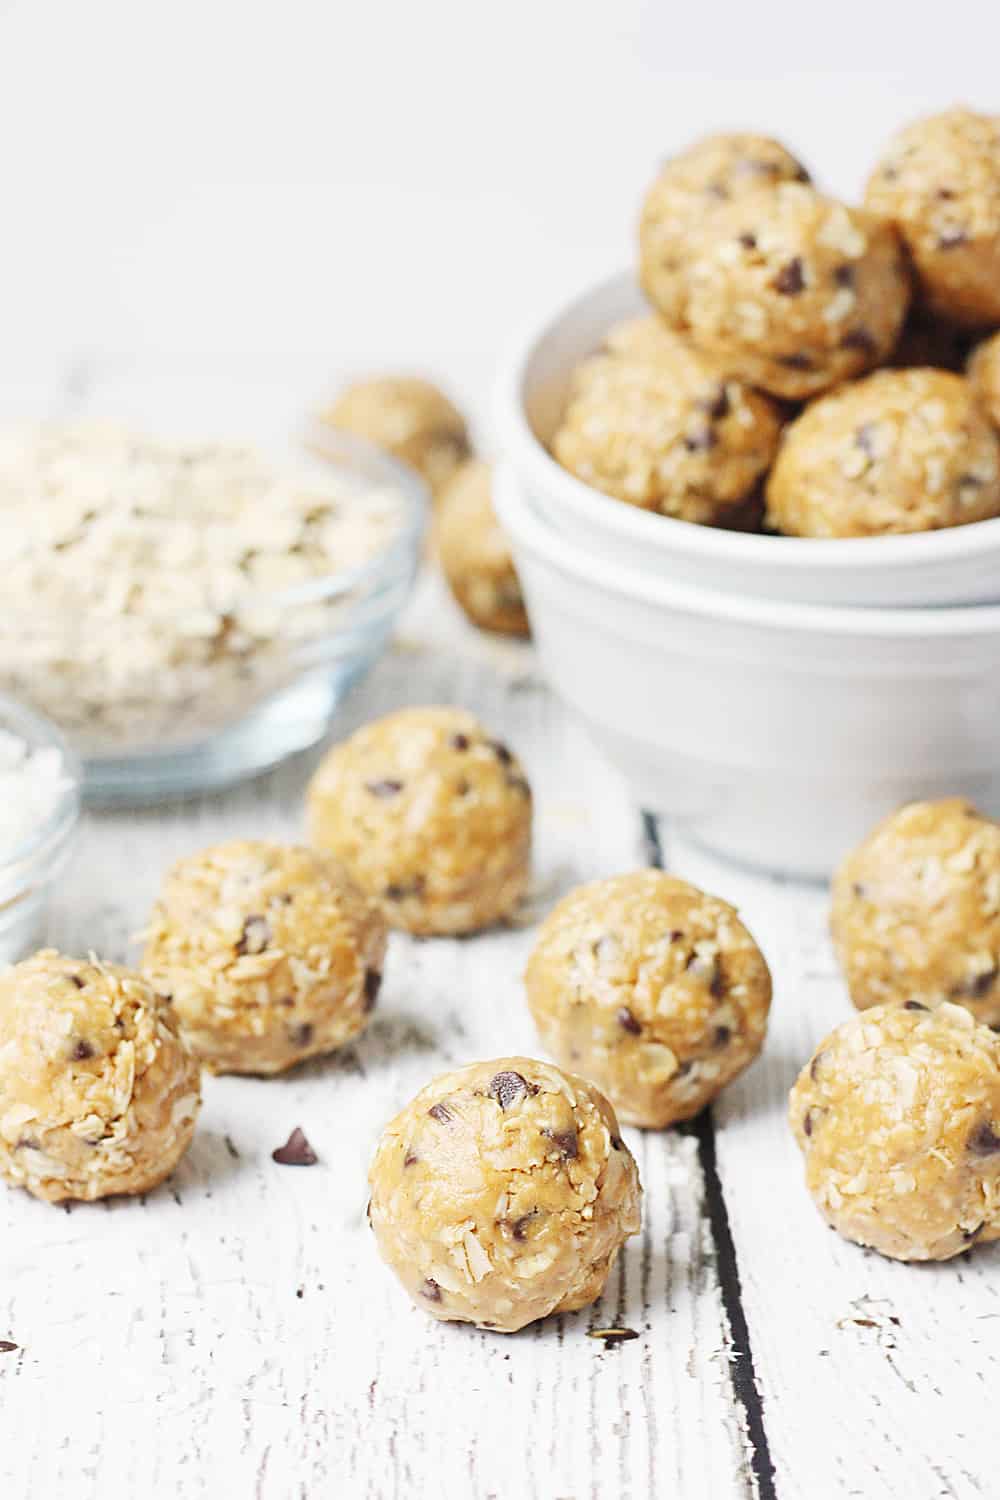 Double Peanut Butter Protein Balls -- Double peanut butter protein balls are full of flavor but not full of sugar or carbs. Make them up to a week ahead for a quick, healthy, on-the-go snack!